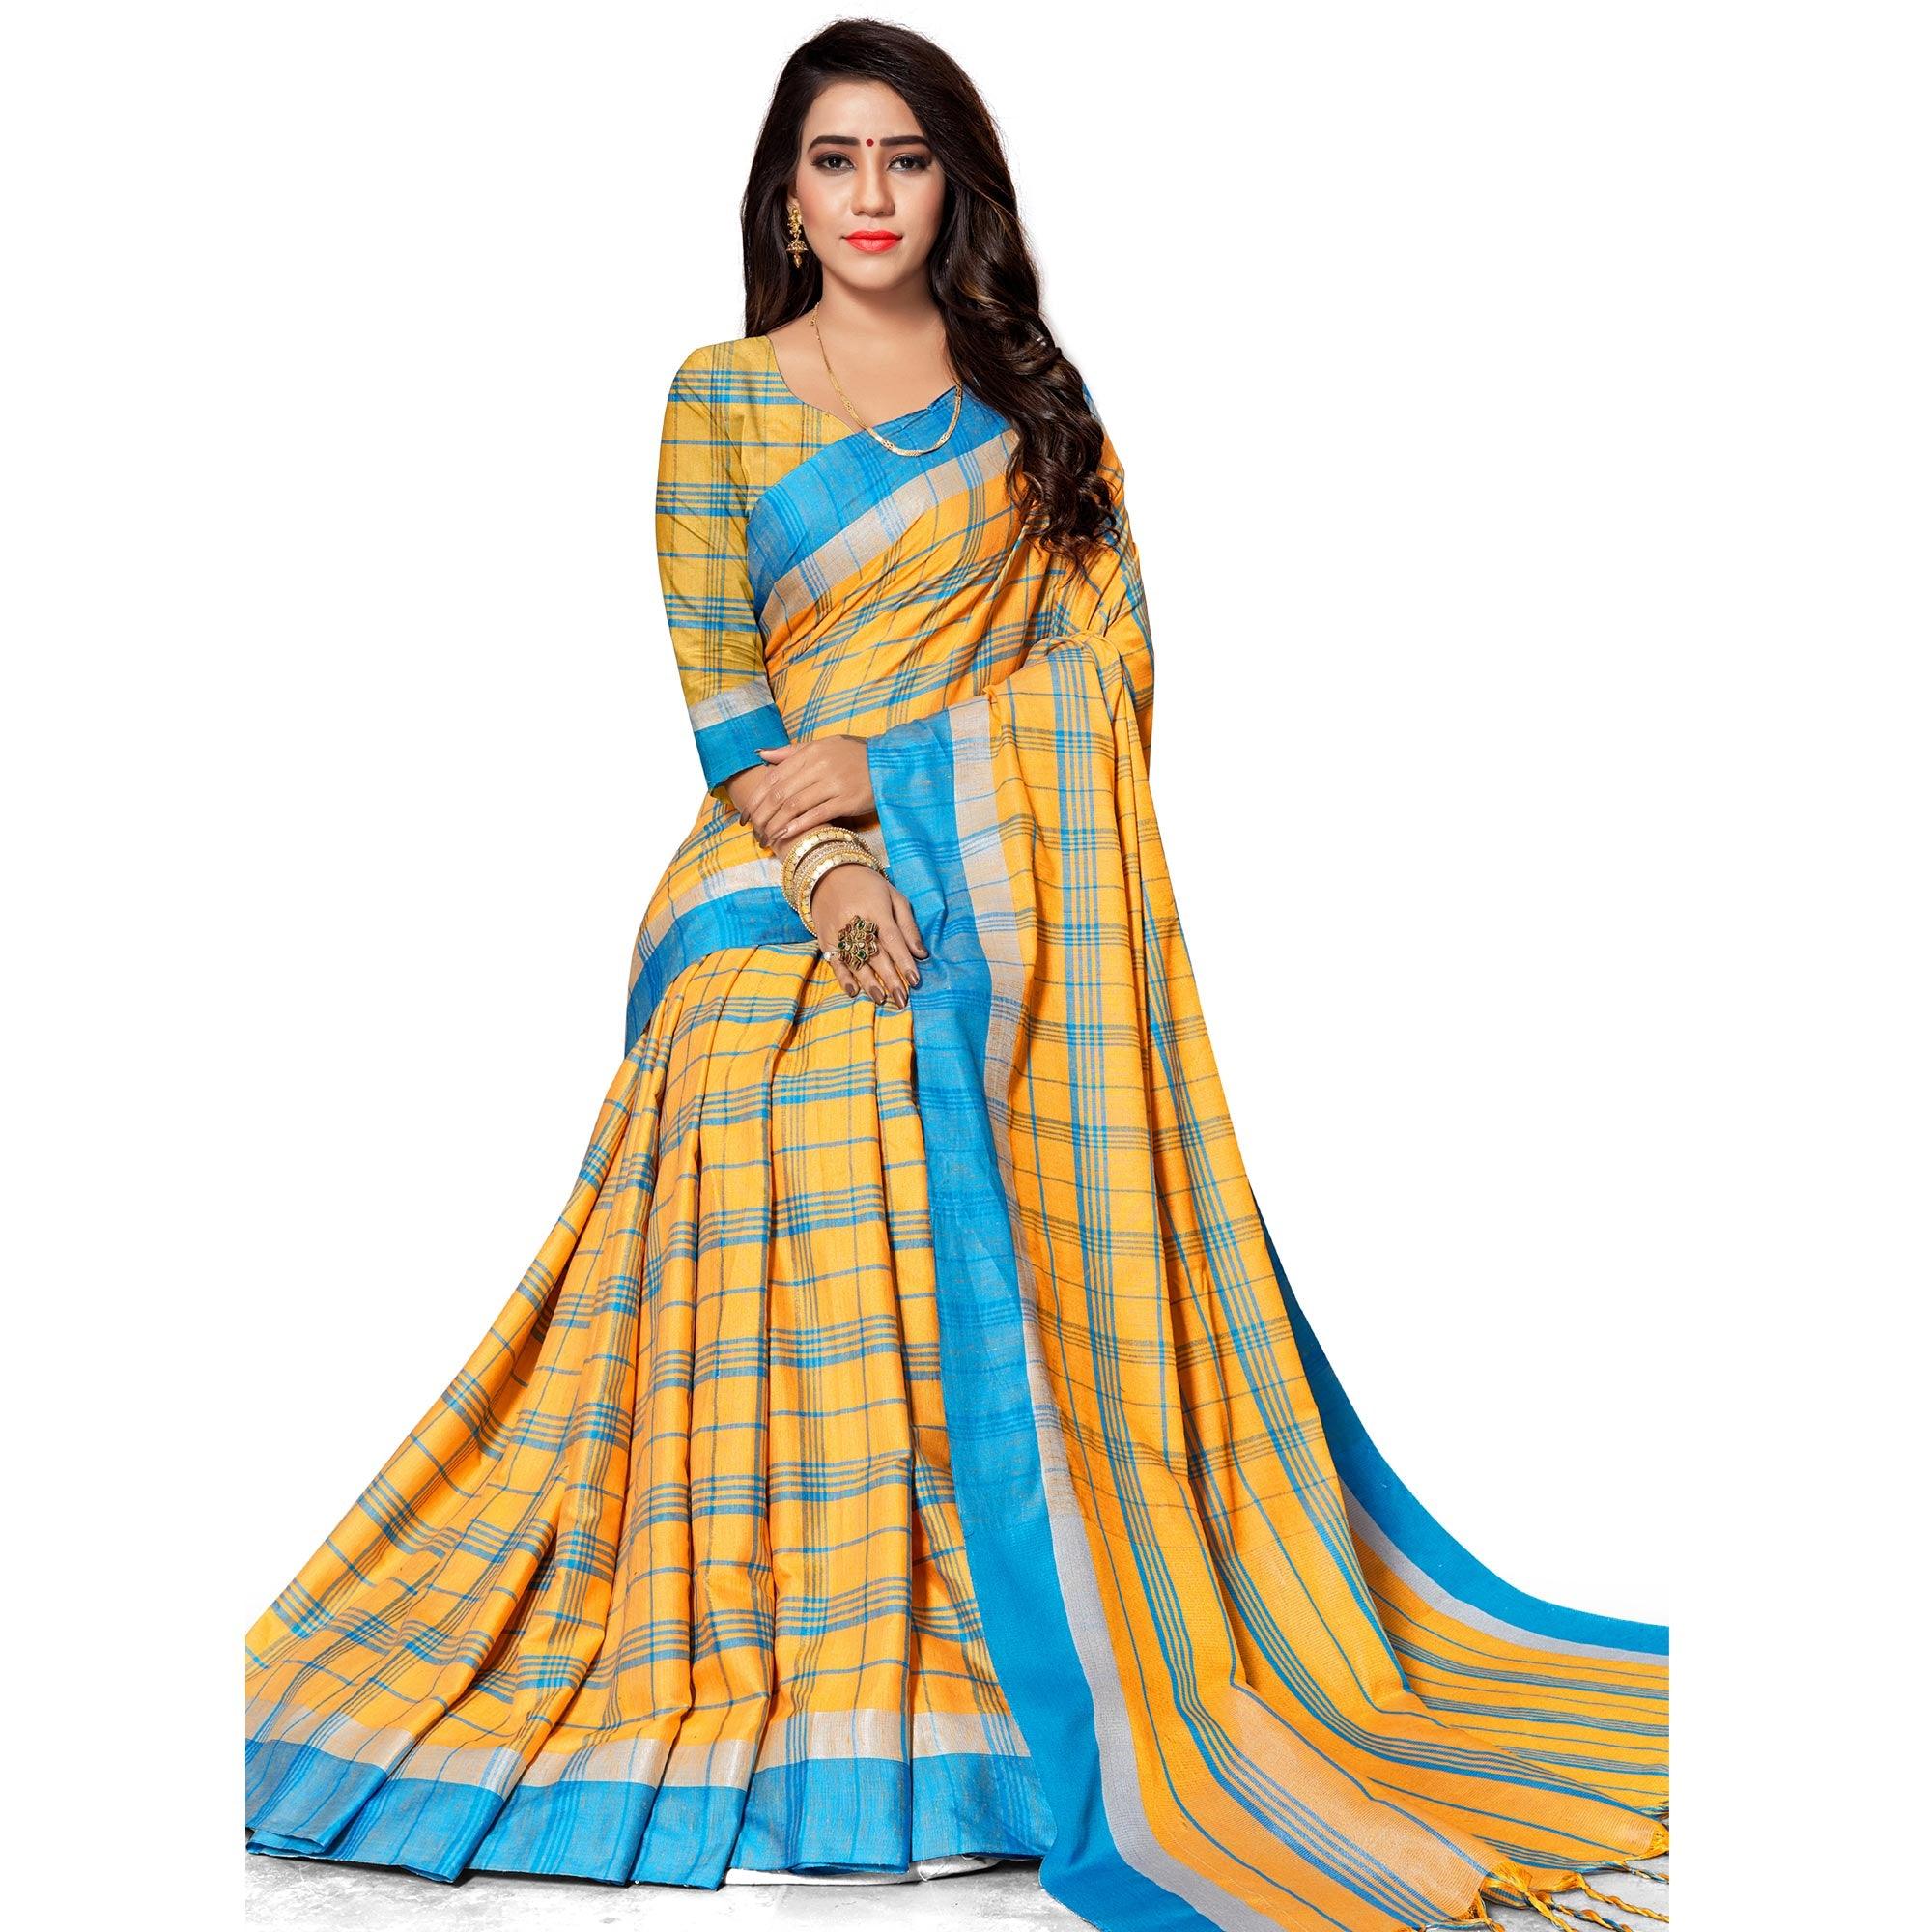 Captivating Yellow Colored Fesive Wear Stripe Print Cotton Silk Saree With Tassels - Peachmode